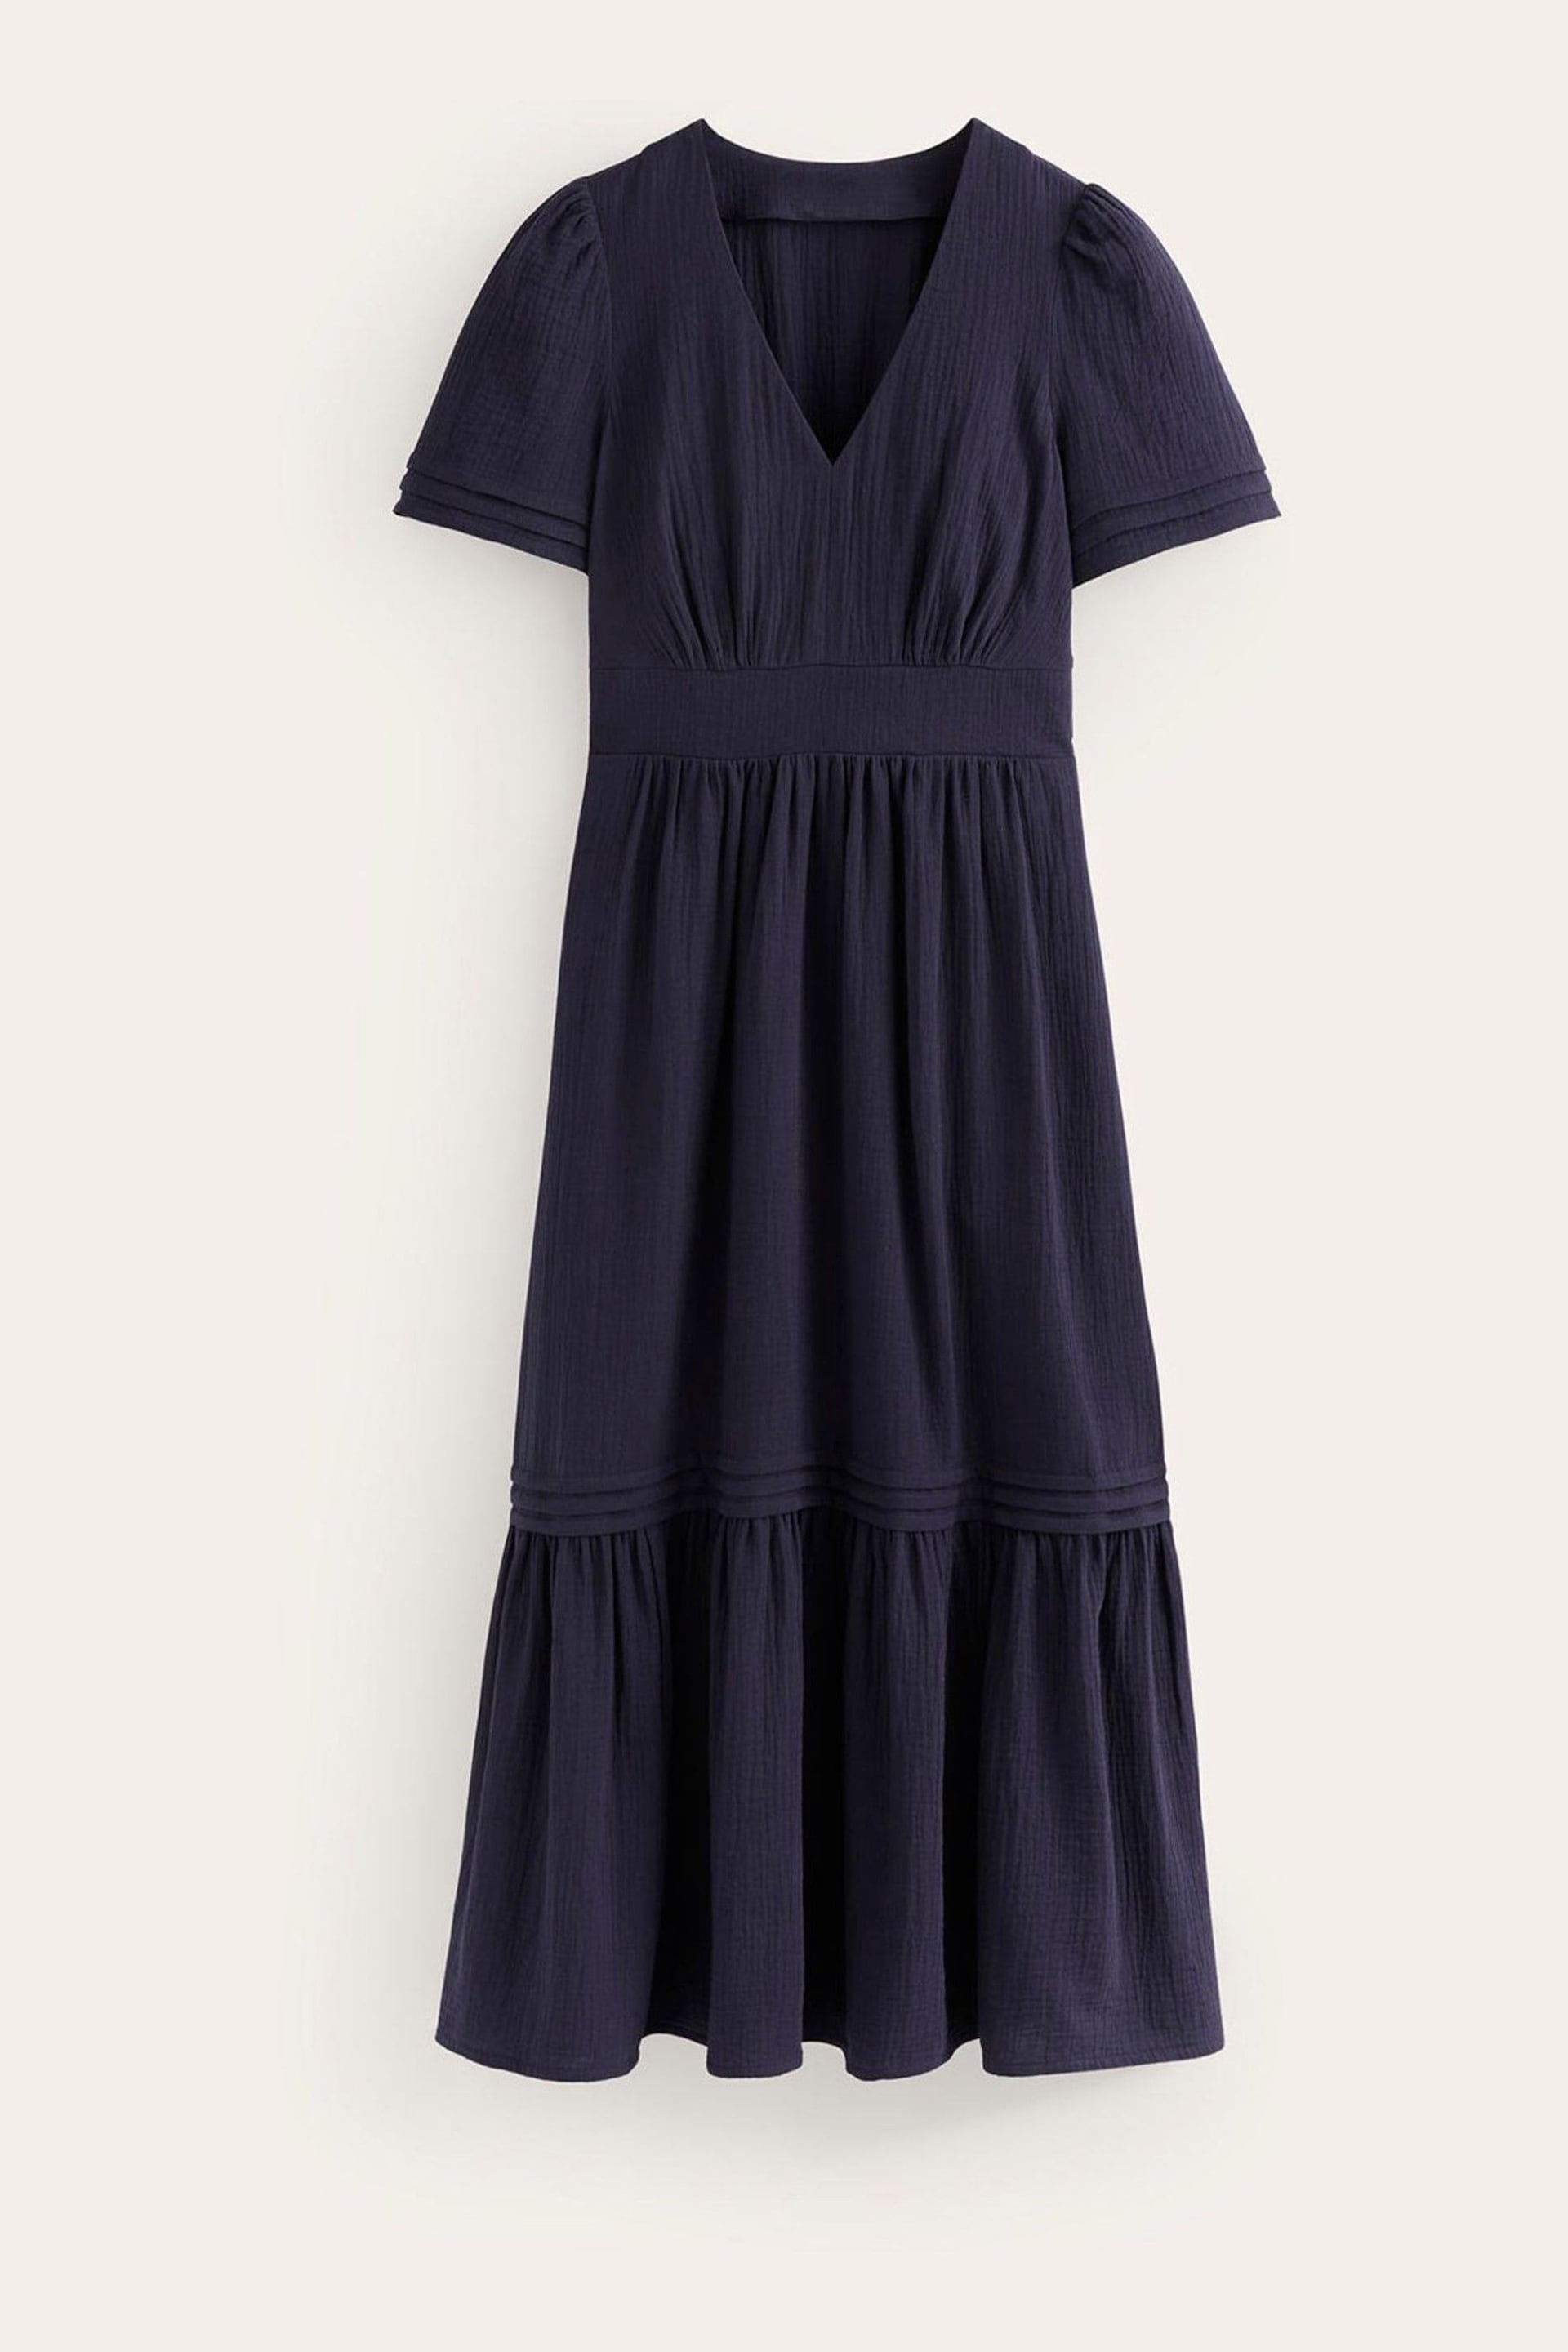 Boden Blue Eve Double Cloth Midi Dress - Image 7 of 7